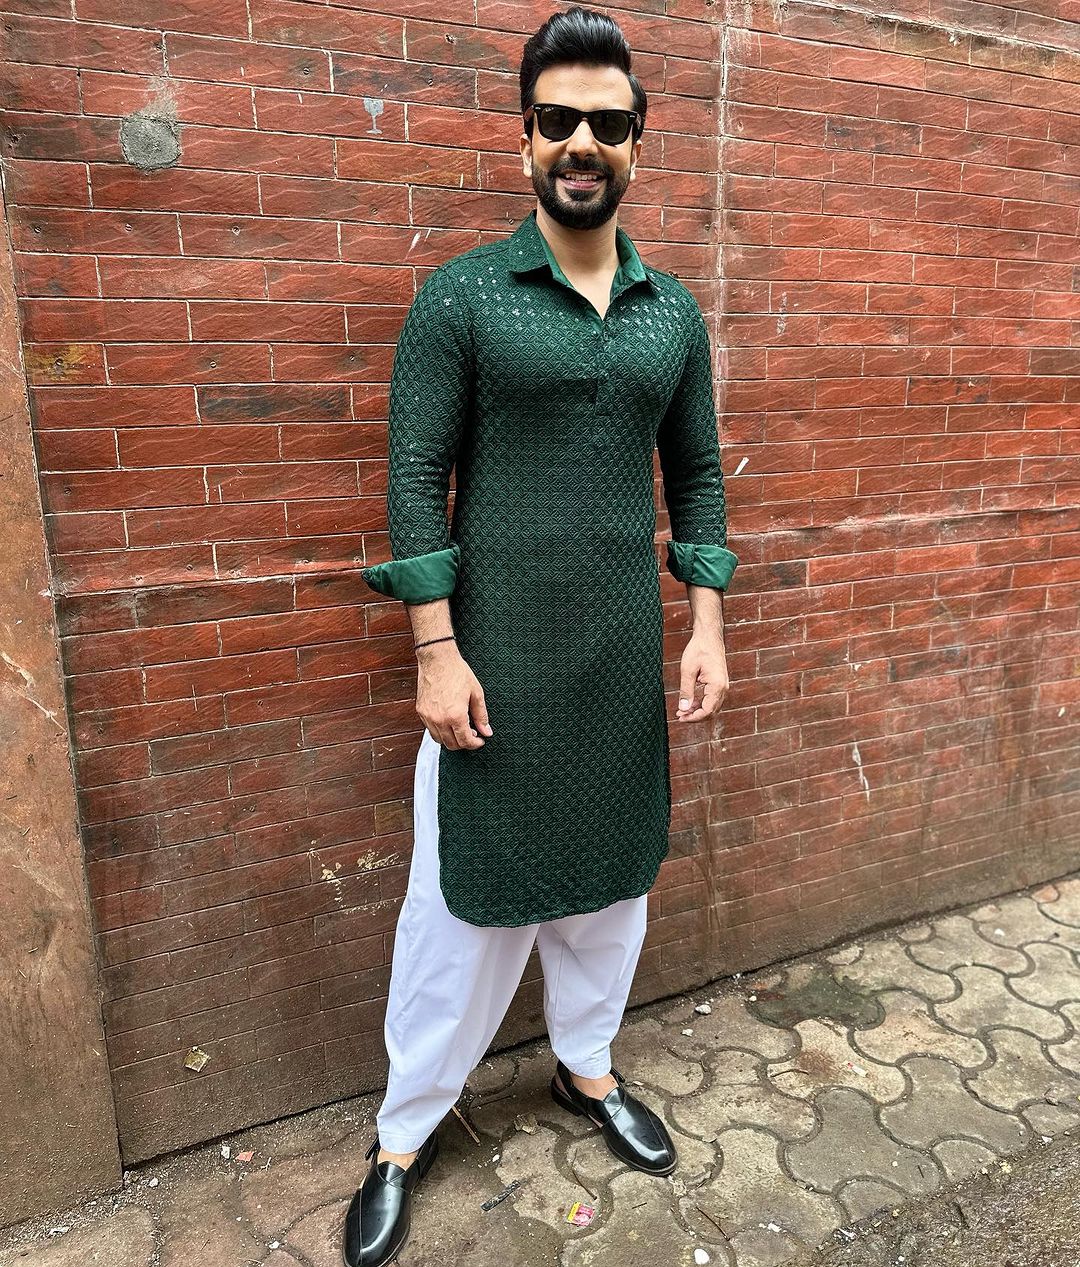 Super Exclusive Update! Versatile Actor Manit Joura Is All Set To Showcase His Talent In New Avatar. He Joins The Team Of Pyar Ka Pehla Naam: Radha Mohan. 